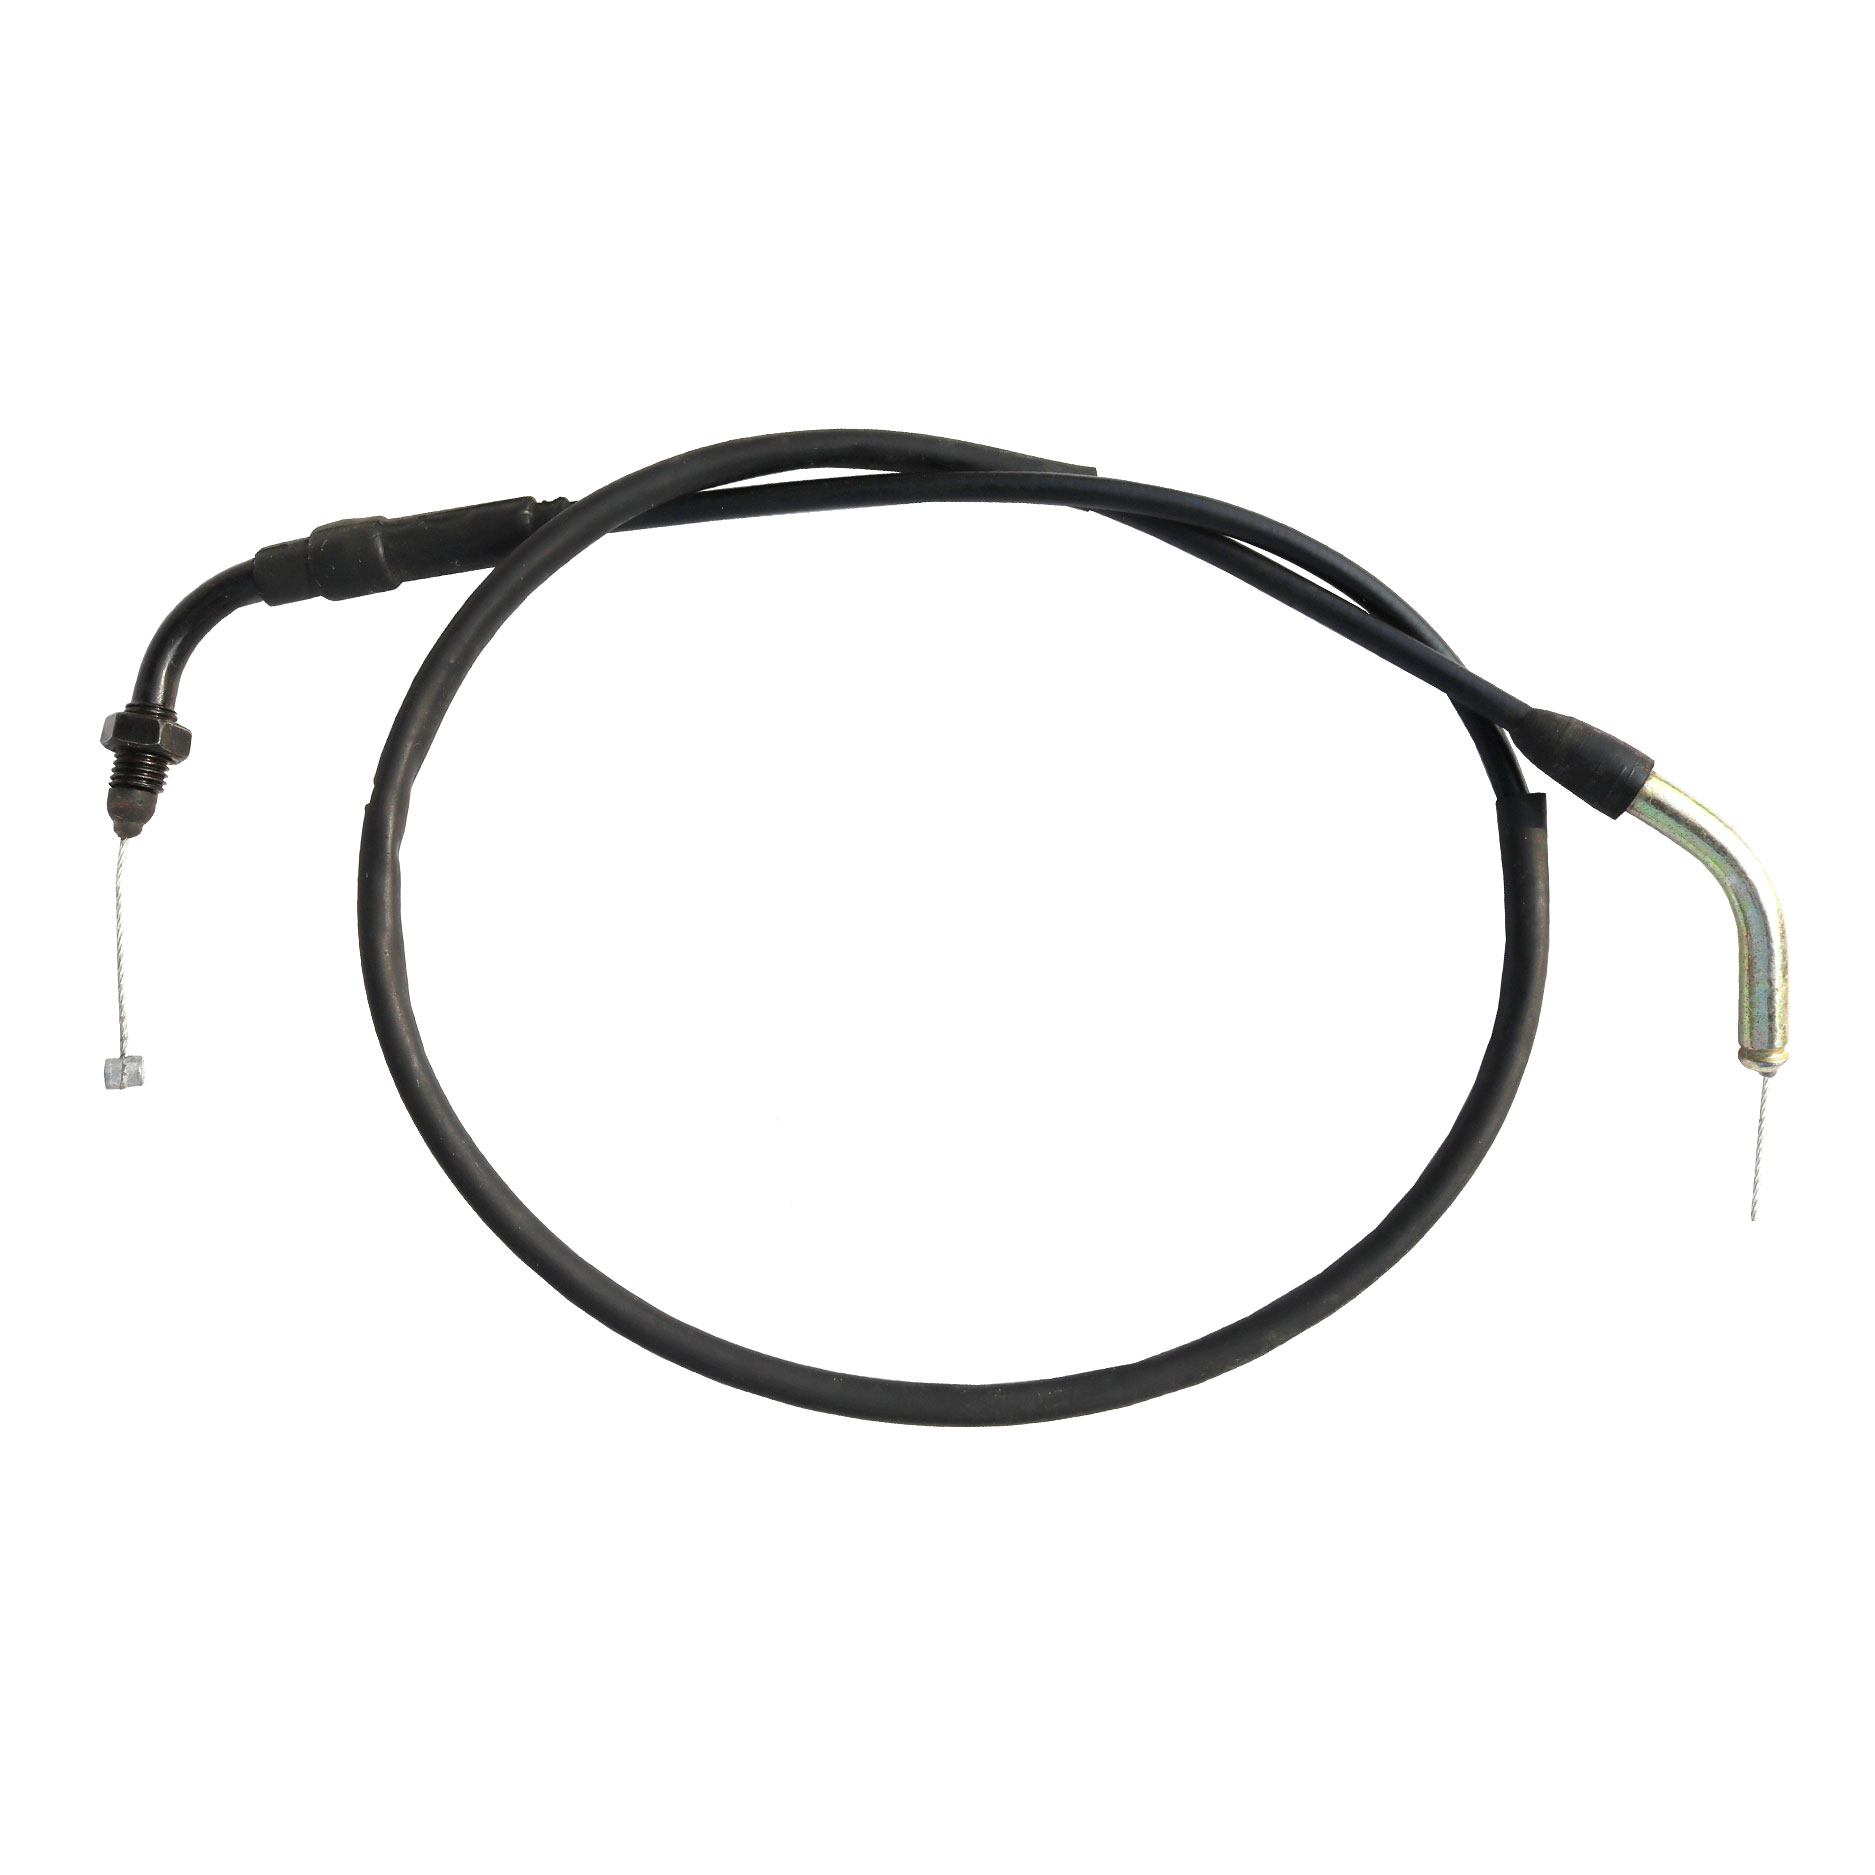 Race-Cable-CG125-Euro